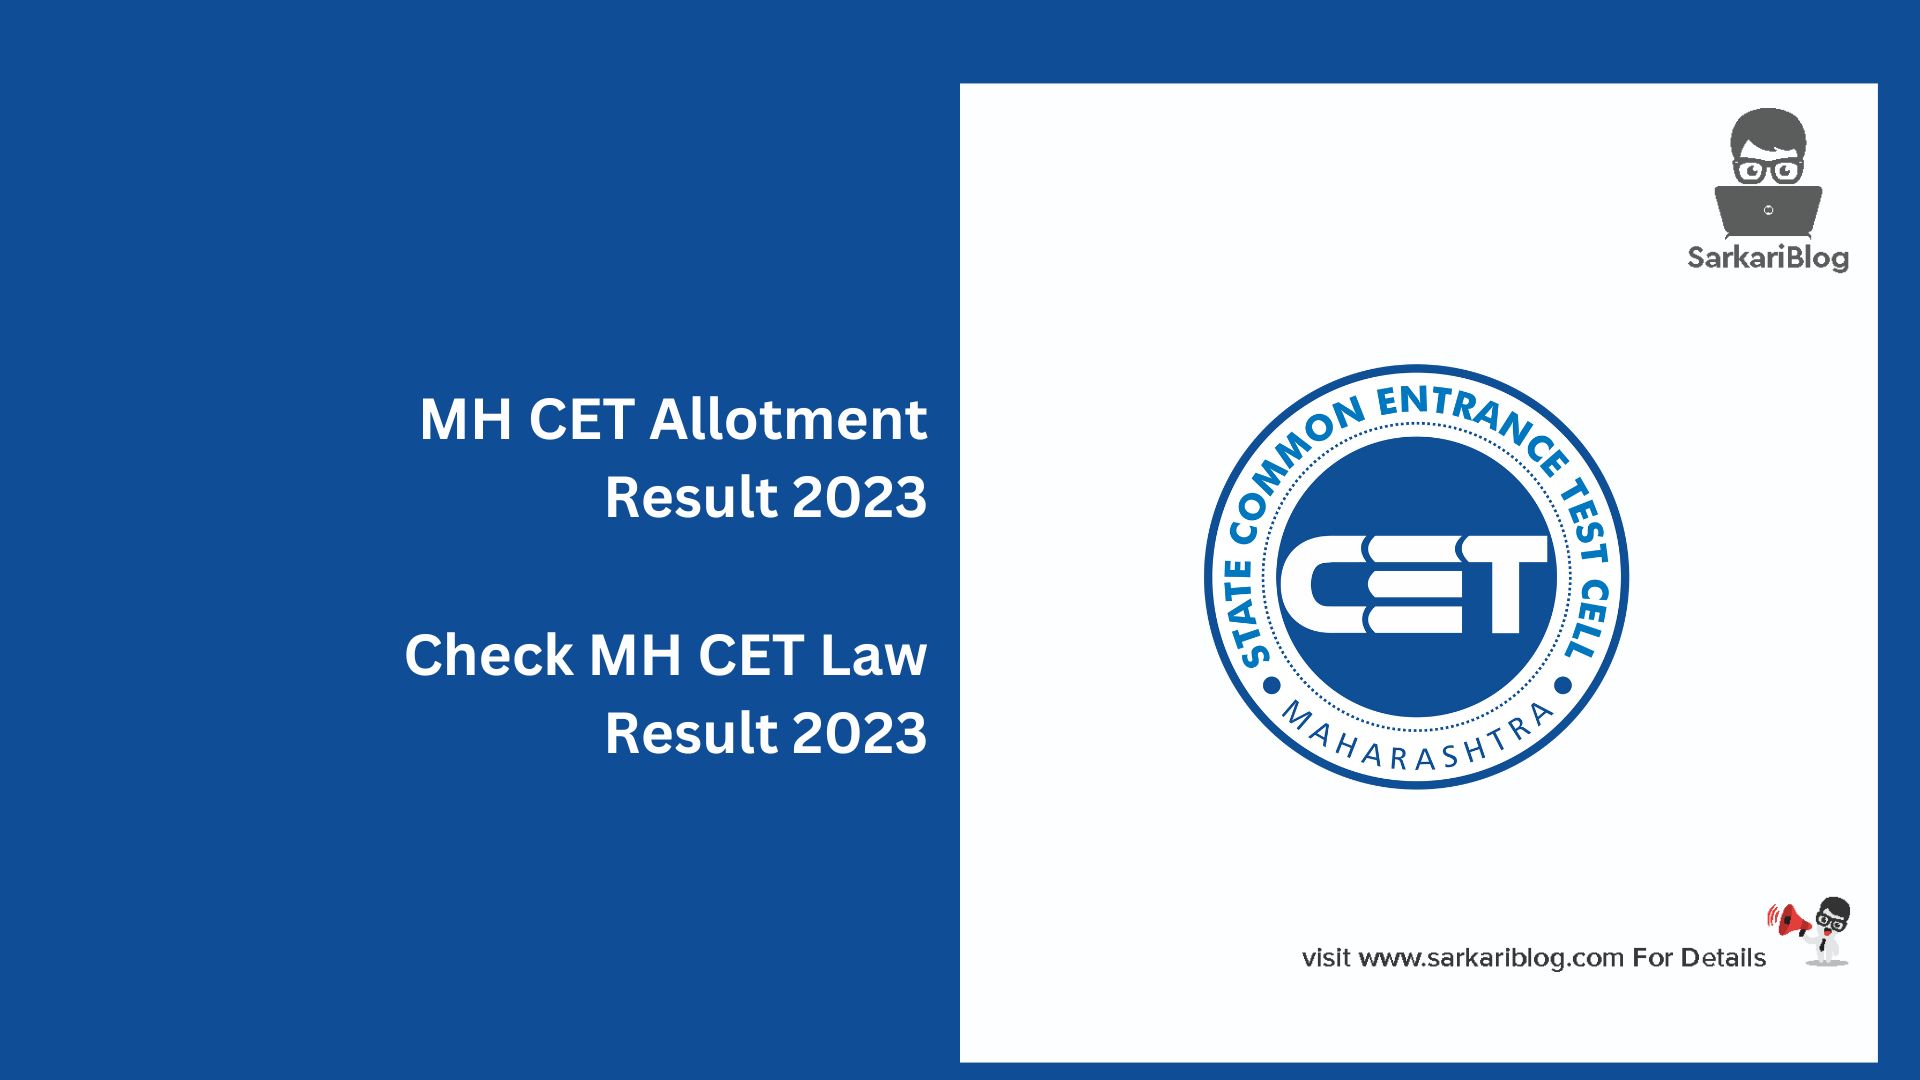 MH CET Allotment Result 2023